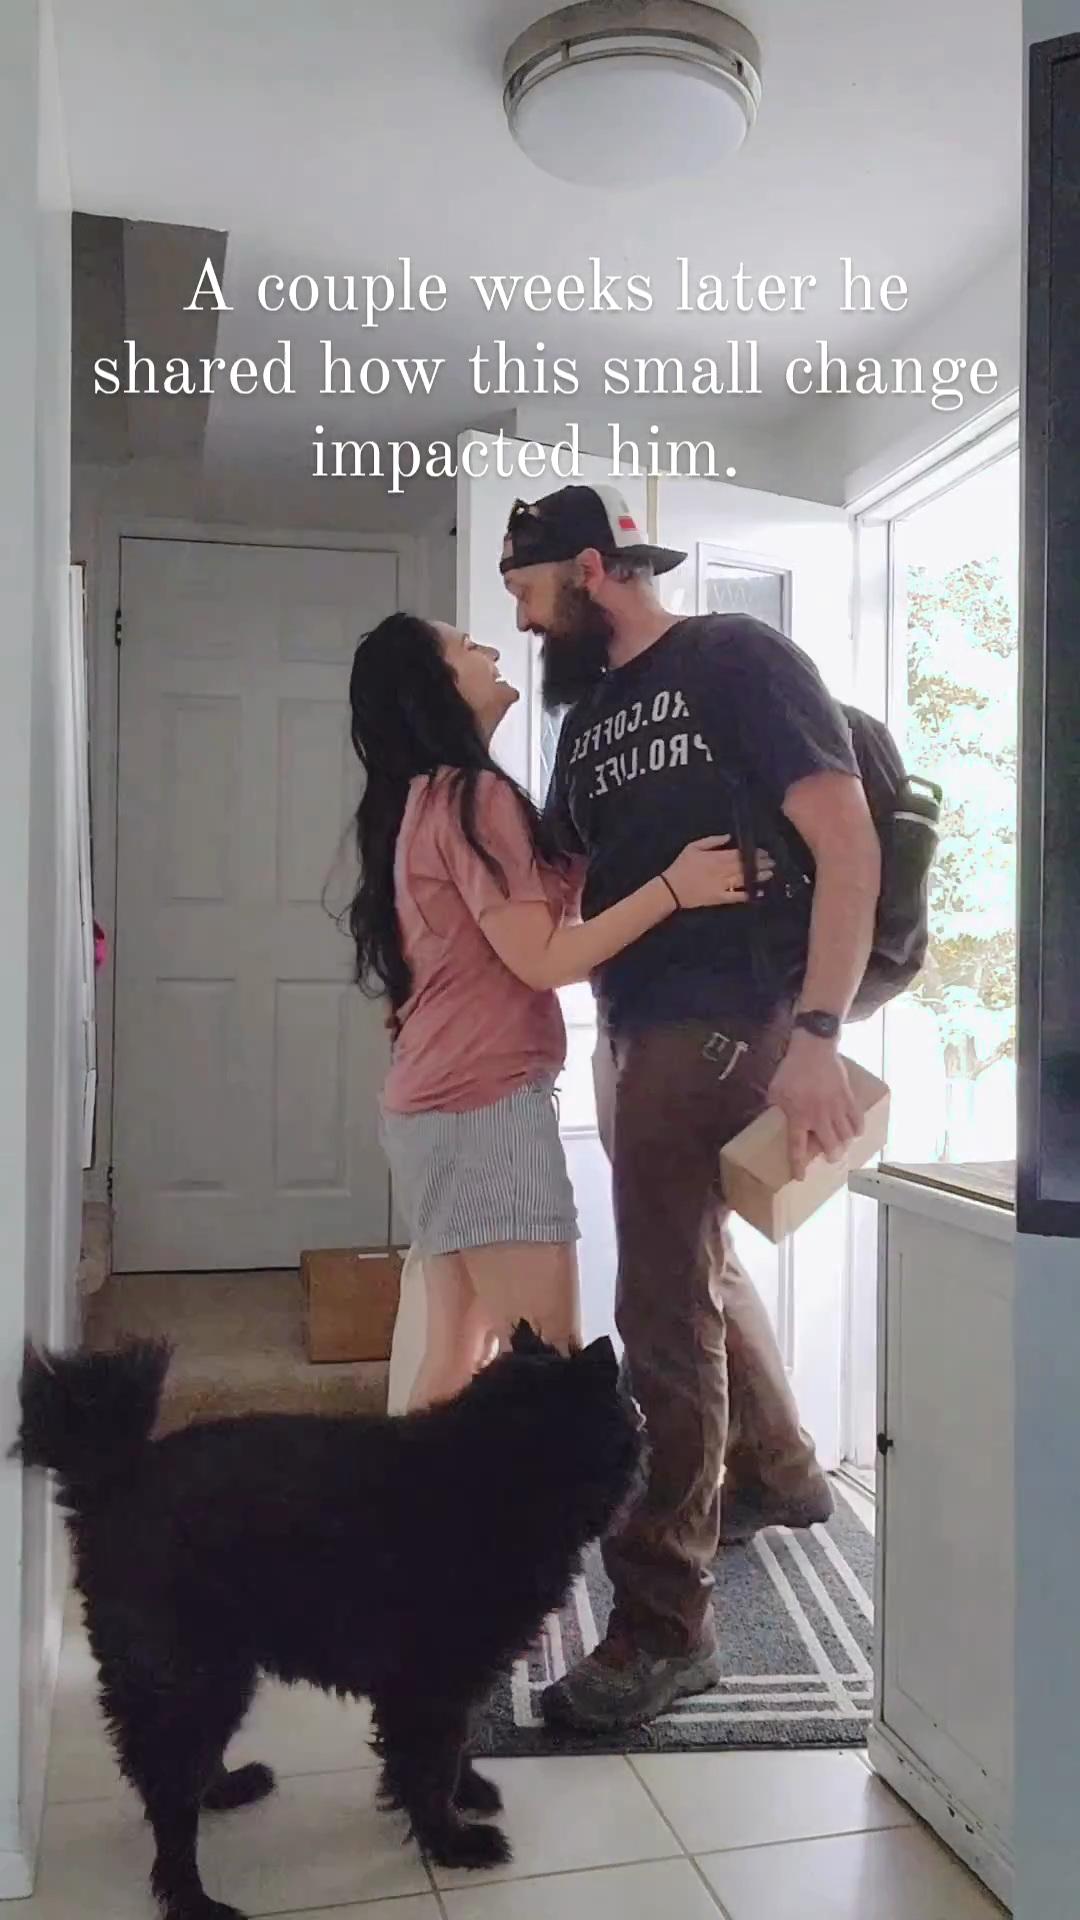 Bethany Rose with her husband, Jake Rose. She believes strong marriages are built on "small acts of service and love," and that these humble efforts can be life-transforming. (Courtesy of <a href="https://www.instagram.com/wavesandlilacs/">Bethany Rose</a>)